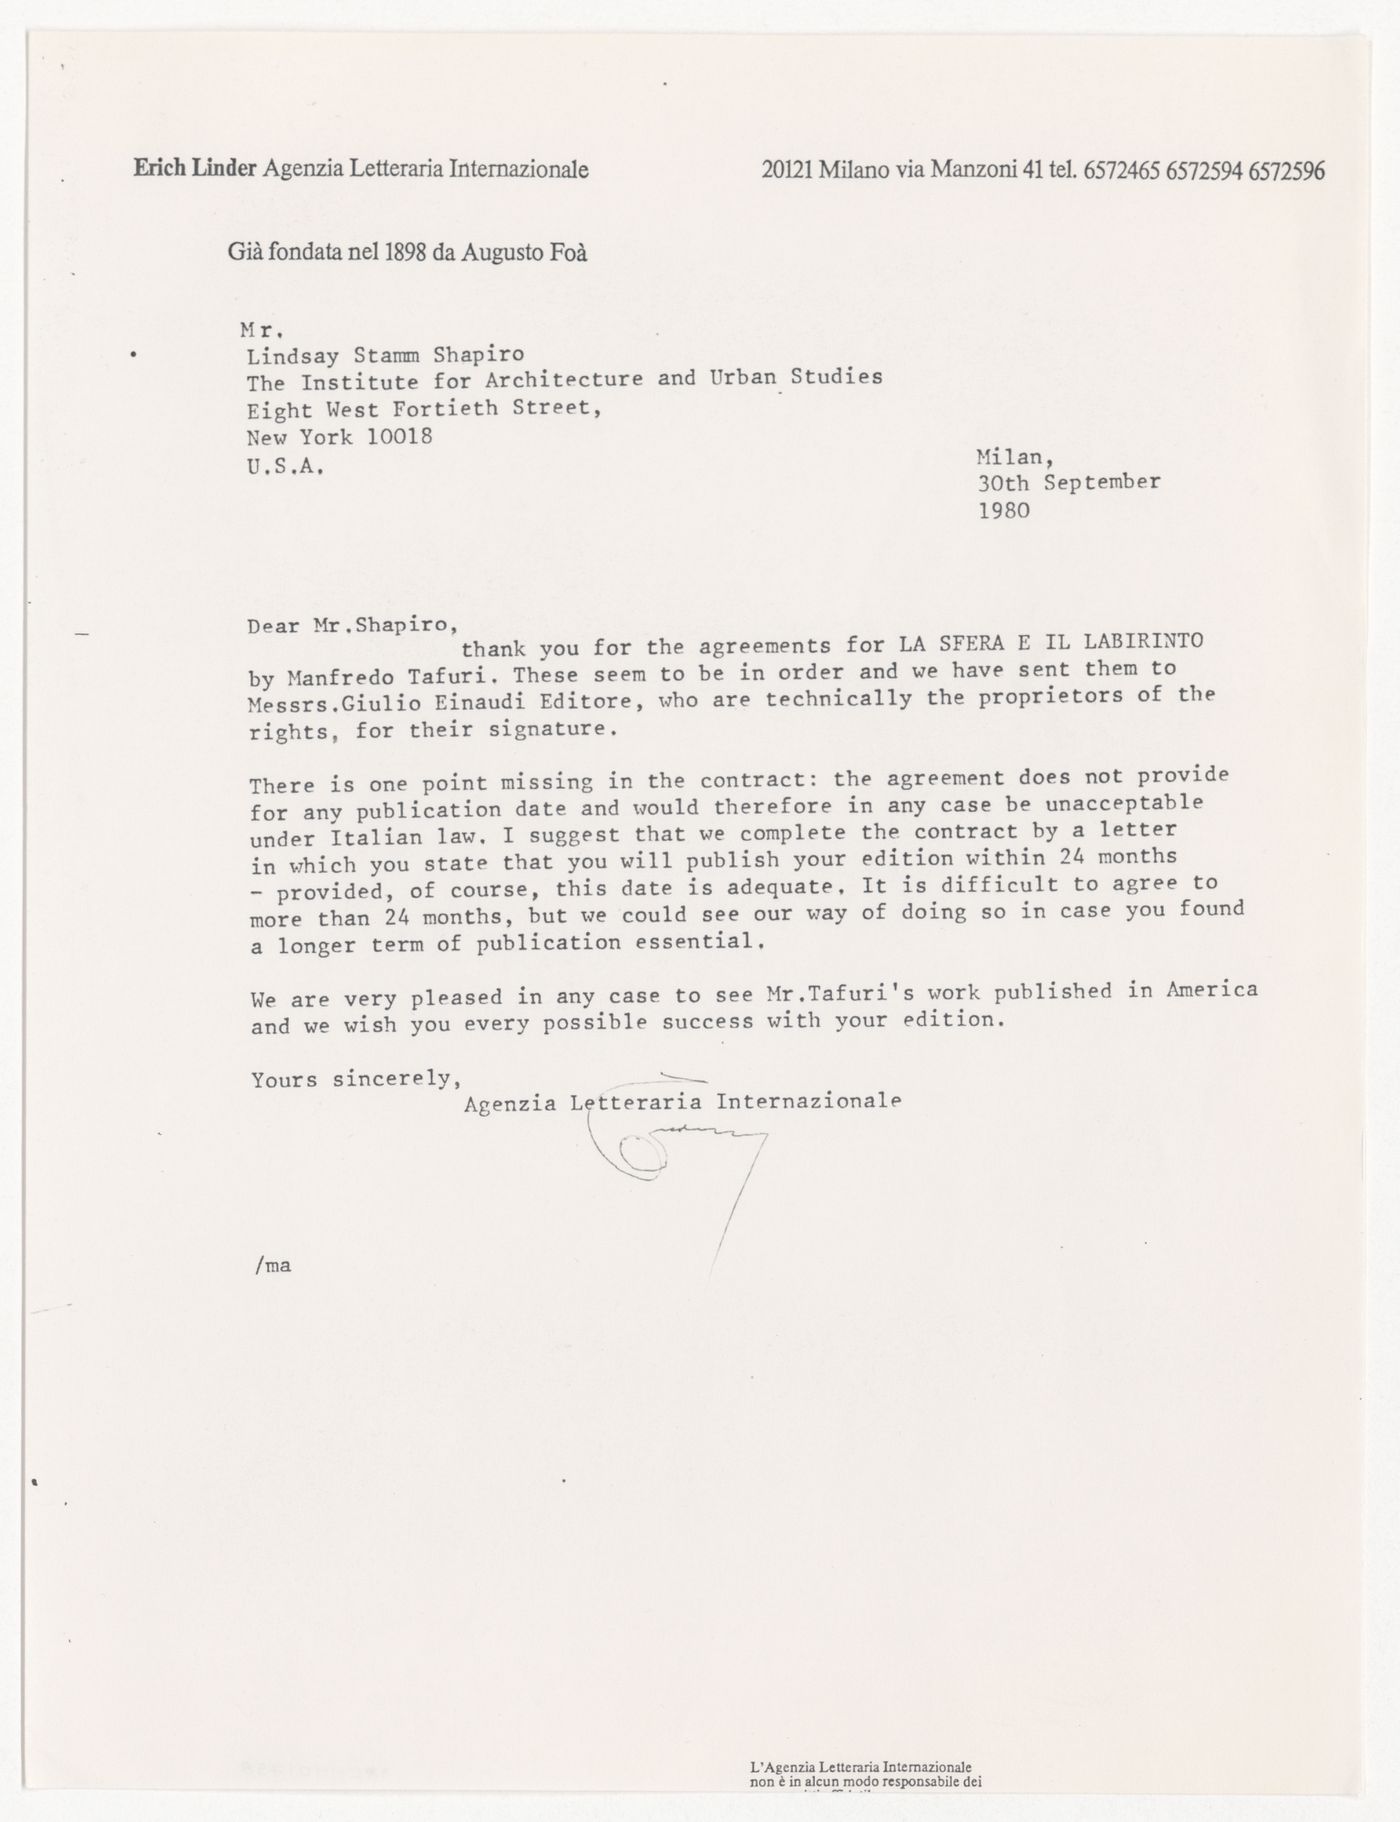 Letter from the Erich Linder to Lindsay Stamm Shapiro about publishing agreement for The Sphere and the Labyrinth by Manfredo Tafuri